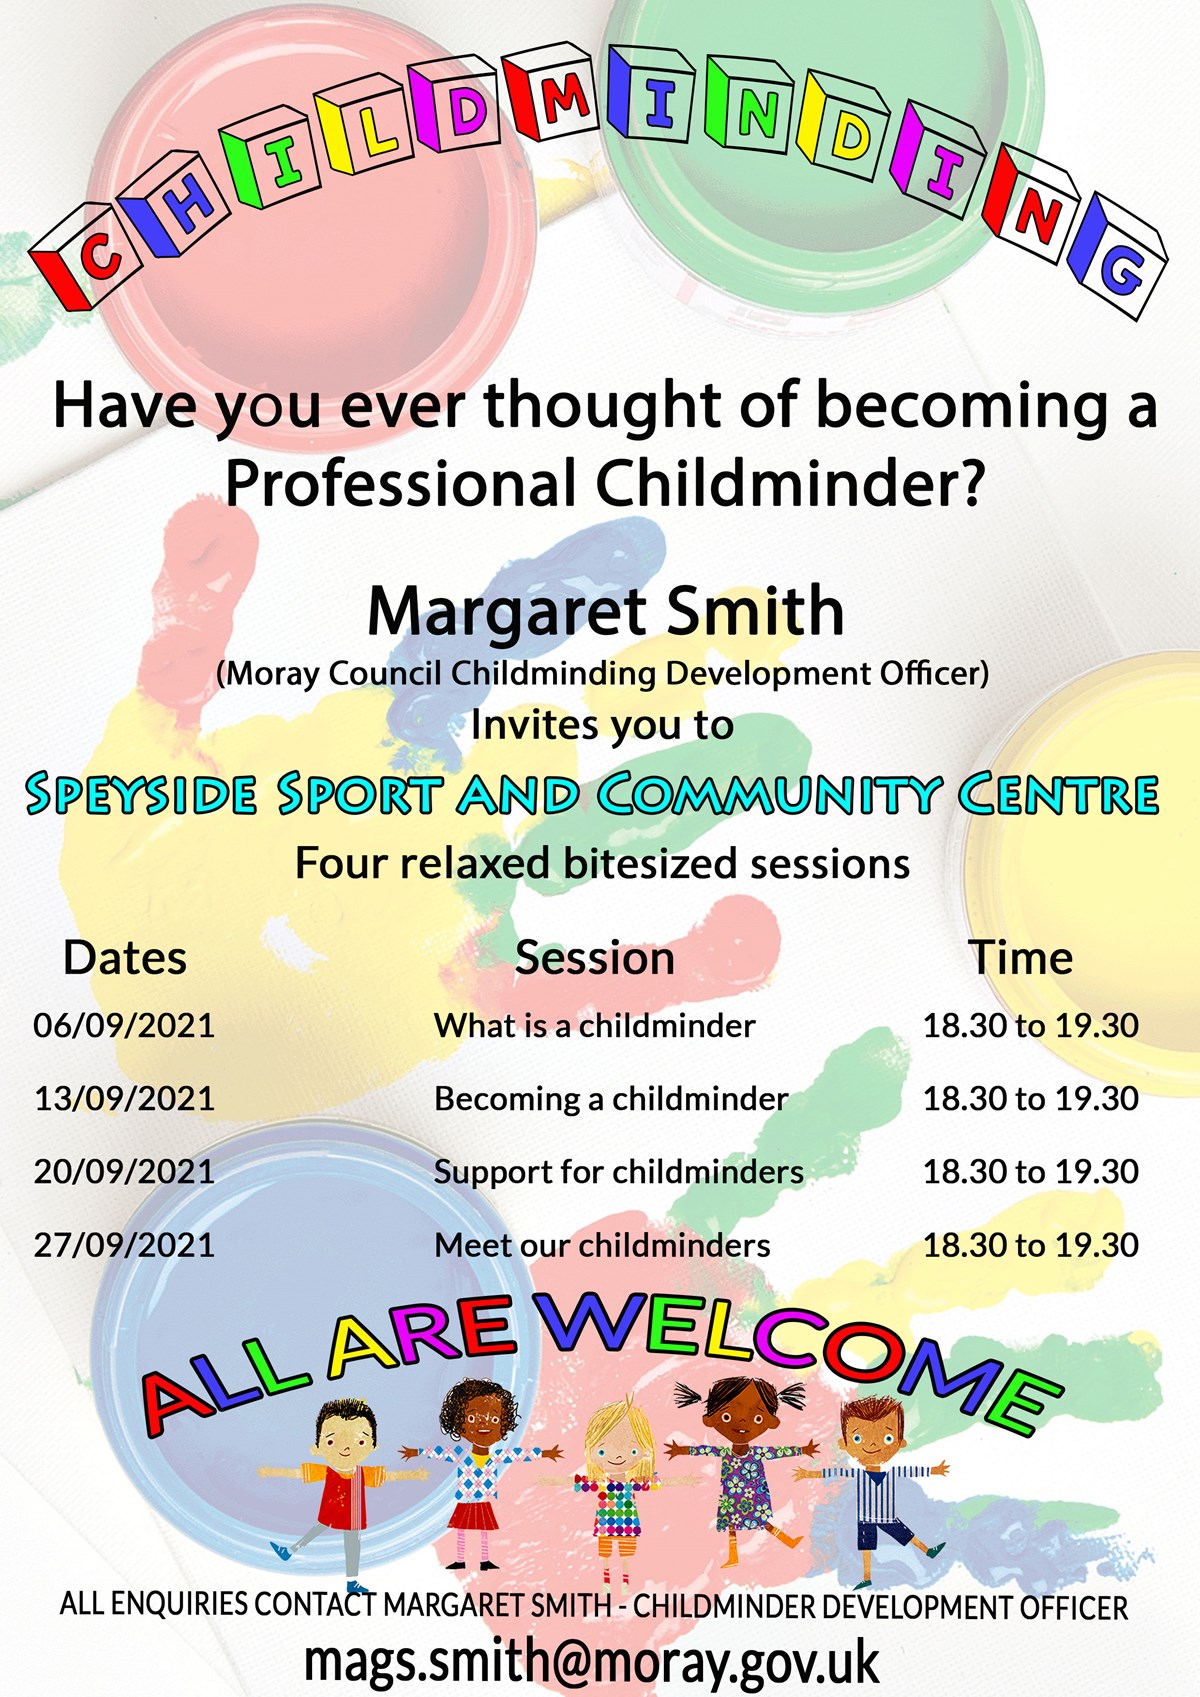 Childminding recruitment event in Speyside